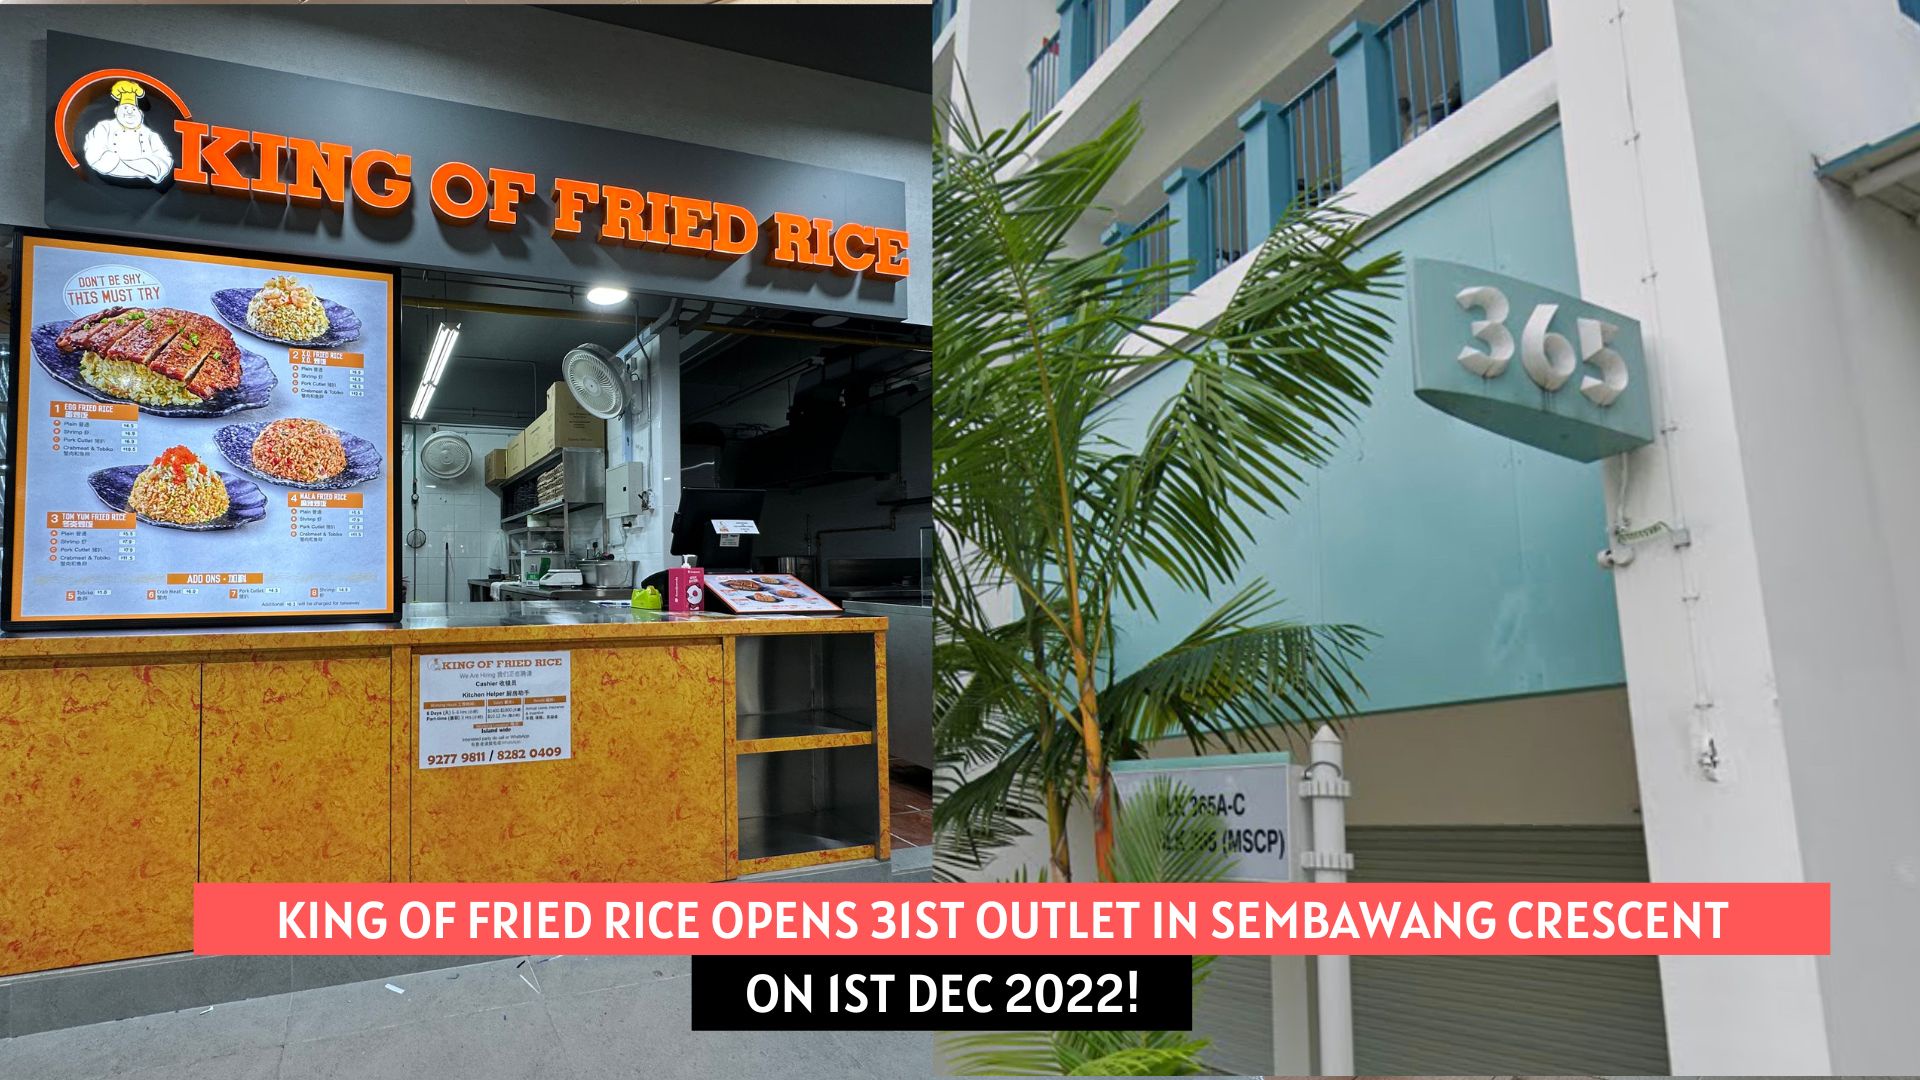 King of Fried Rice Opens 31st Outlet in Sembawang on 1st Dec 2022! featured image